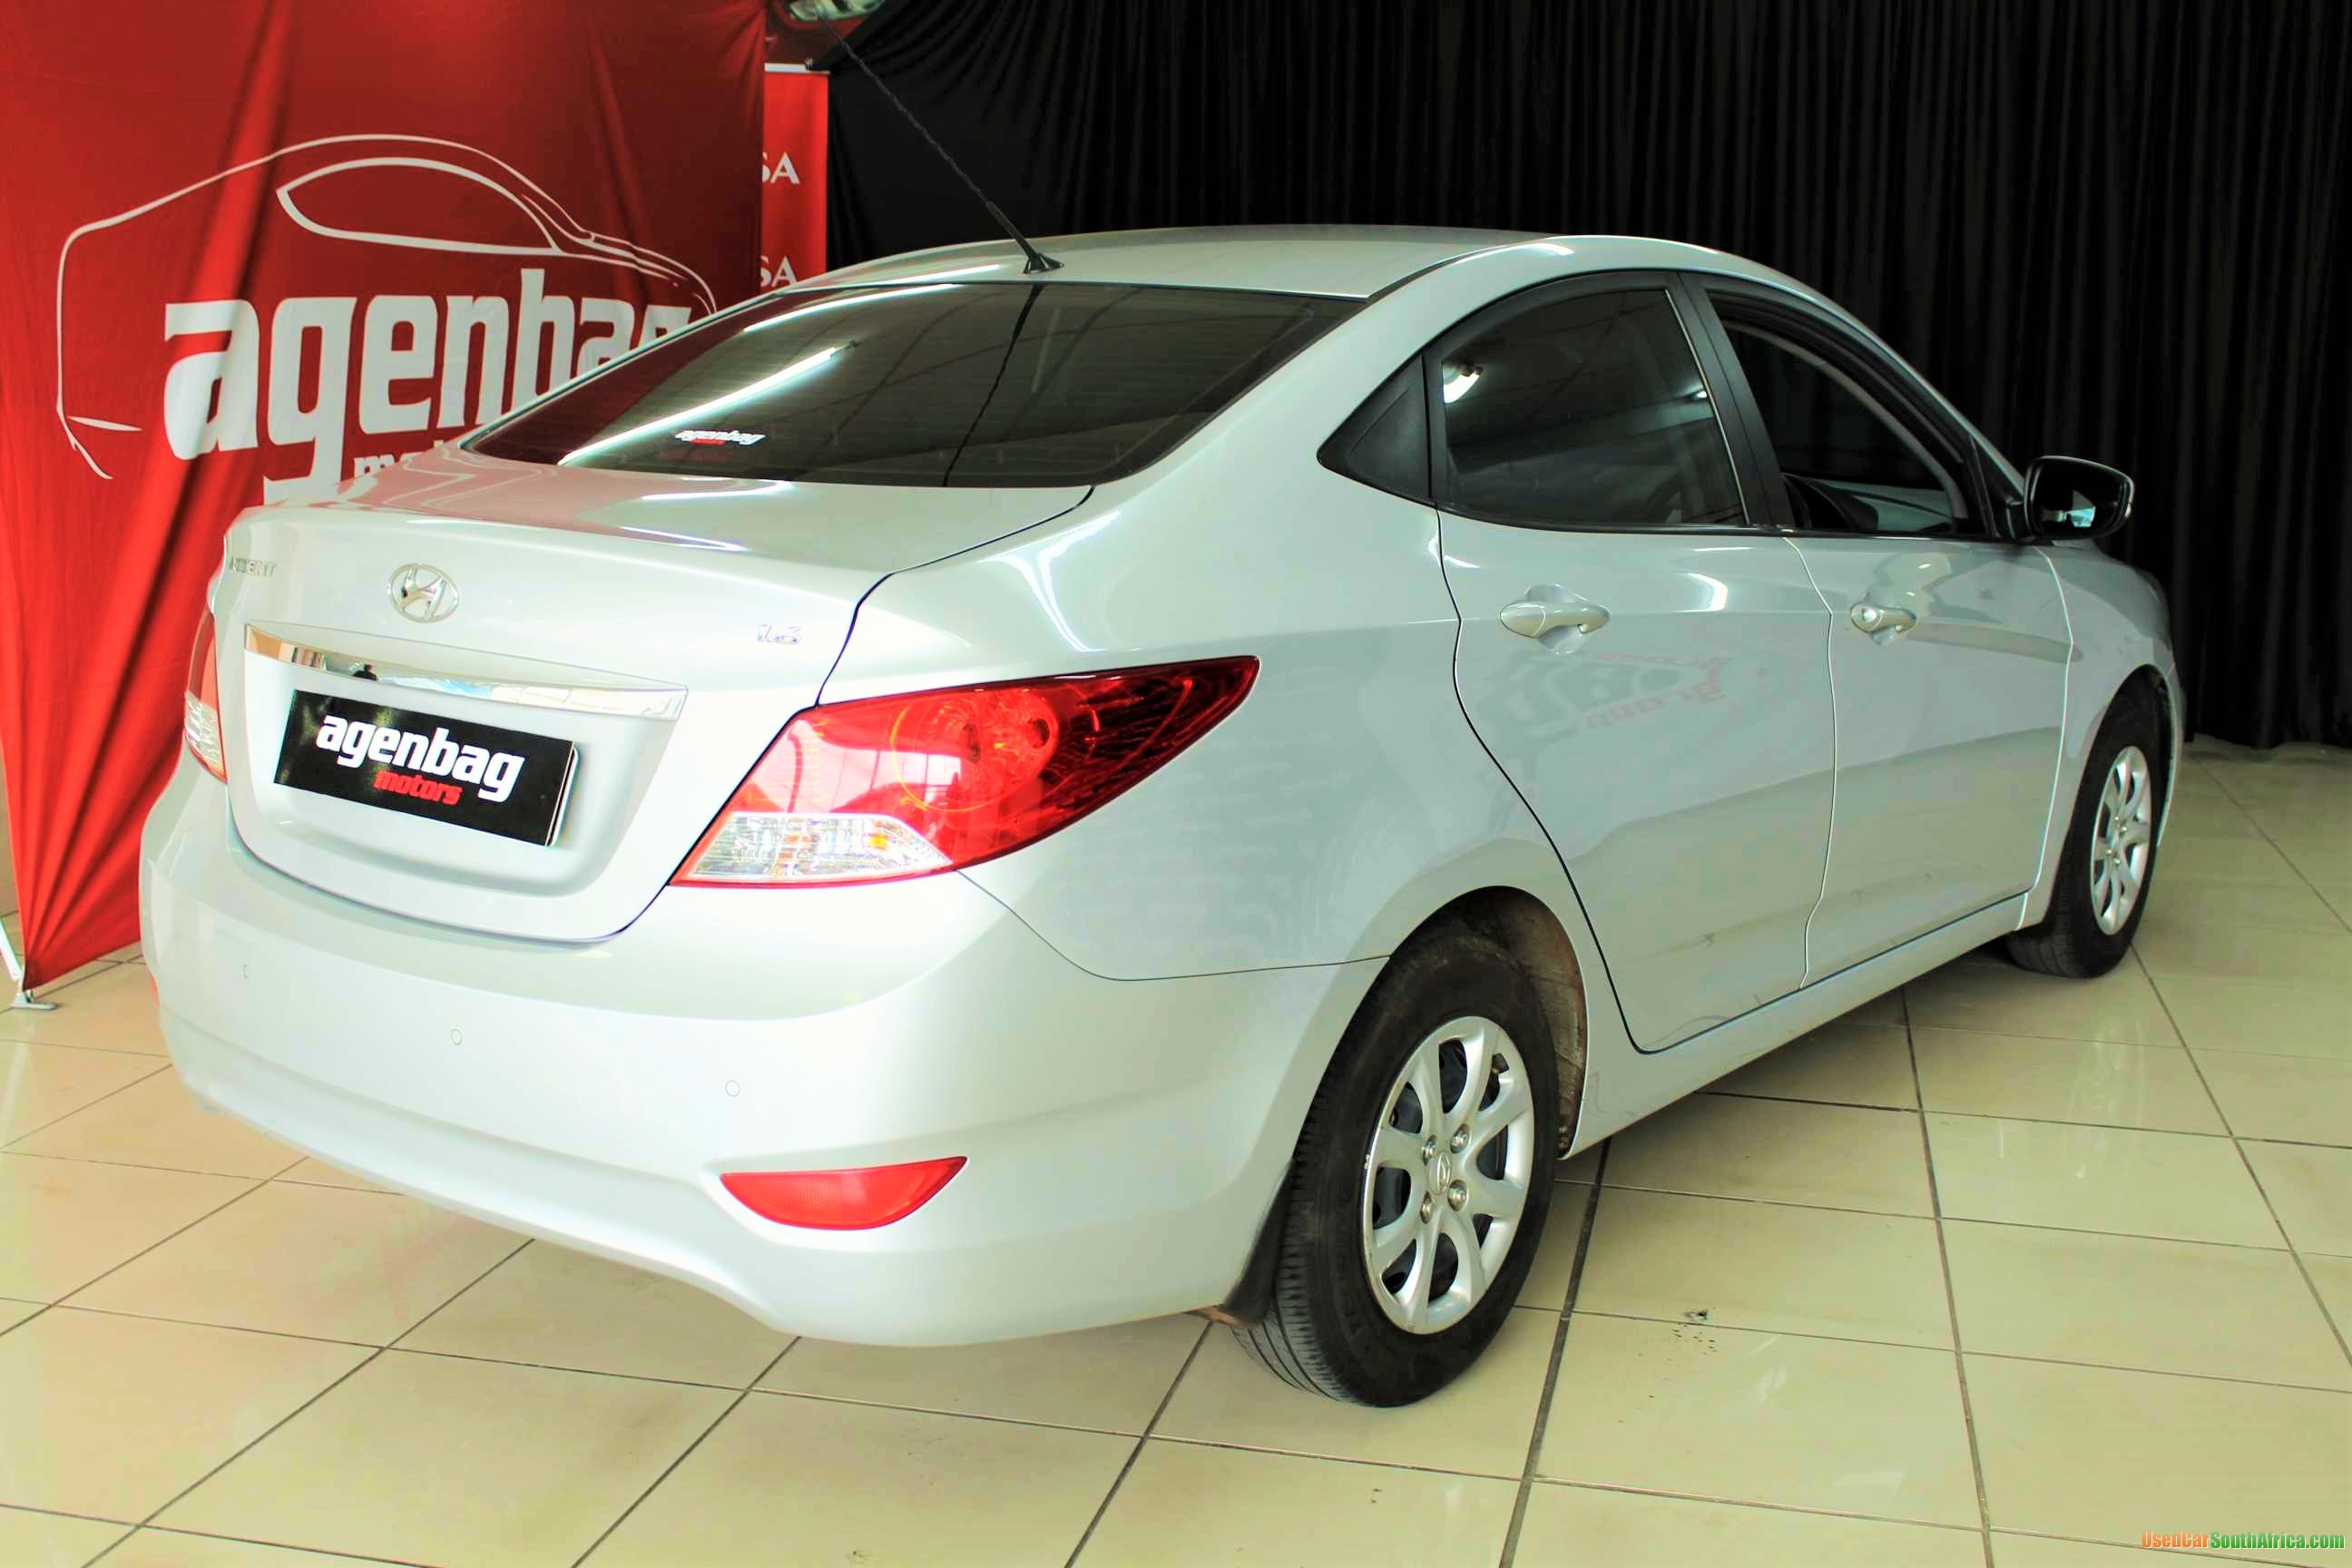 2013 Hyundai Accent used car for sale in Klerksdorp North West South ...